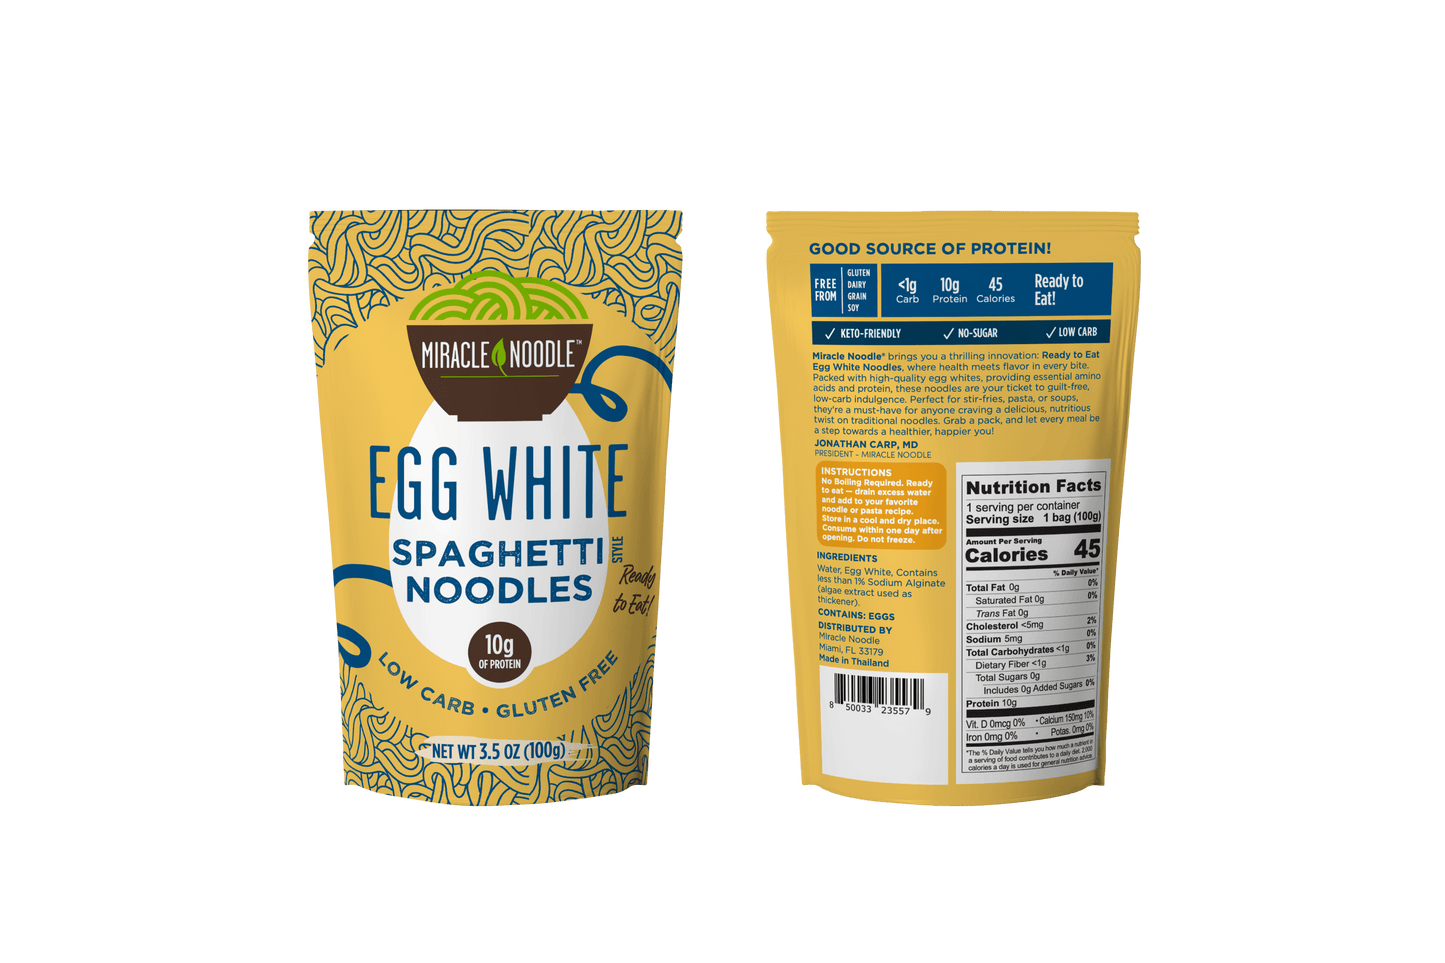 12-Pack Bundle: Miracle Noodle Egg White Spaghetti and Vermicelli Noodles